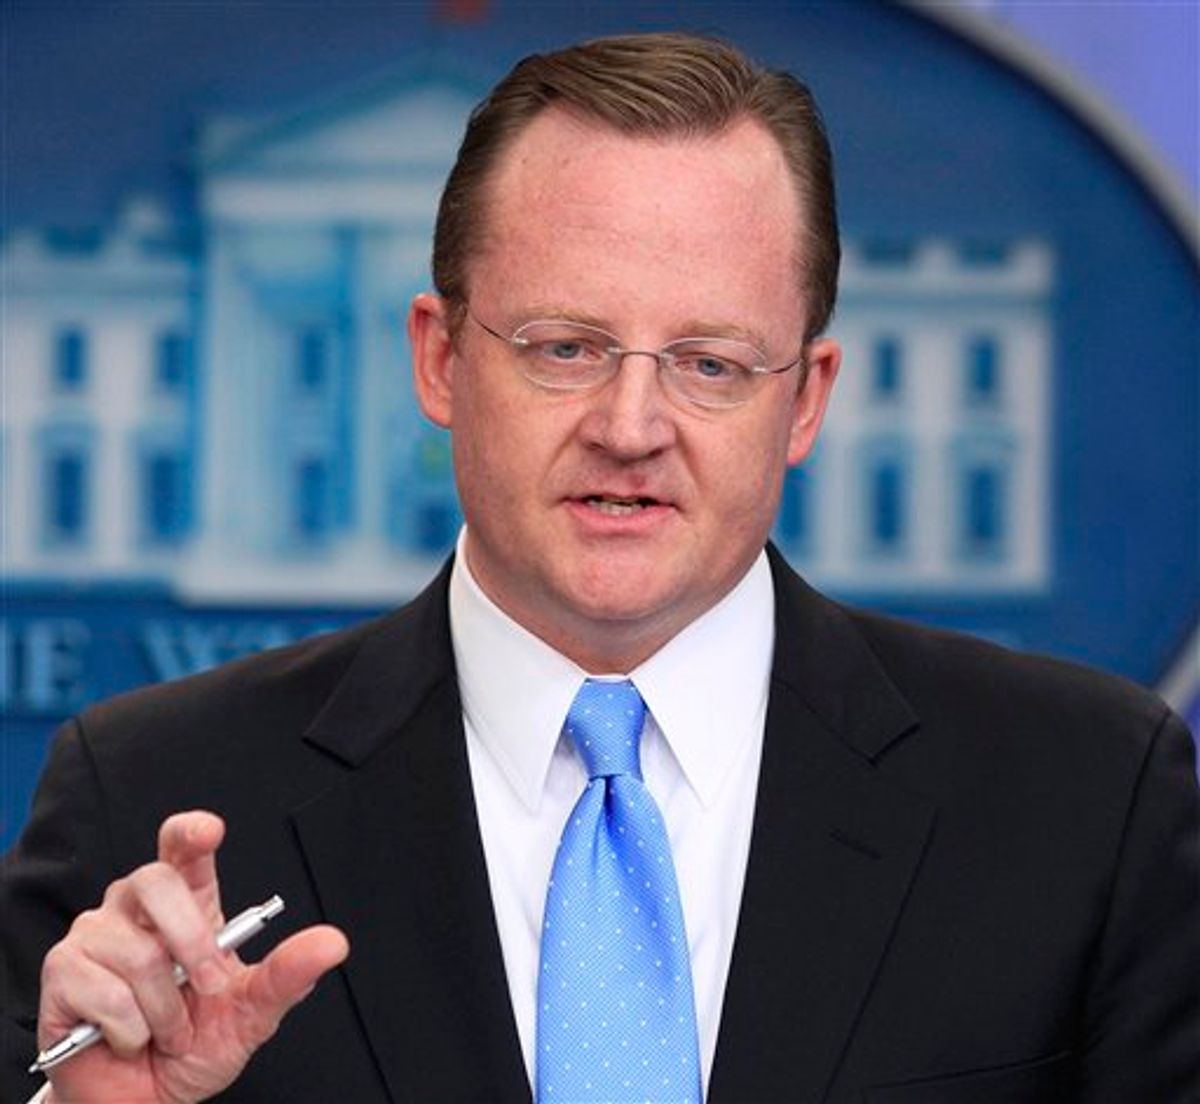 White House Press Secretary Robert Gibbs answers questions on Egypt during his daily news briefing at the White House in Washington, Friday, Jan. 28, 2011. (AP Photo/Carolyn Kaster)  (AP)